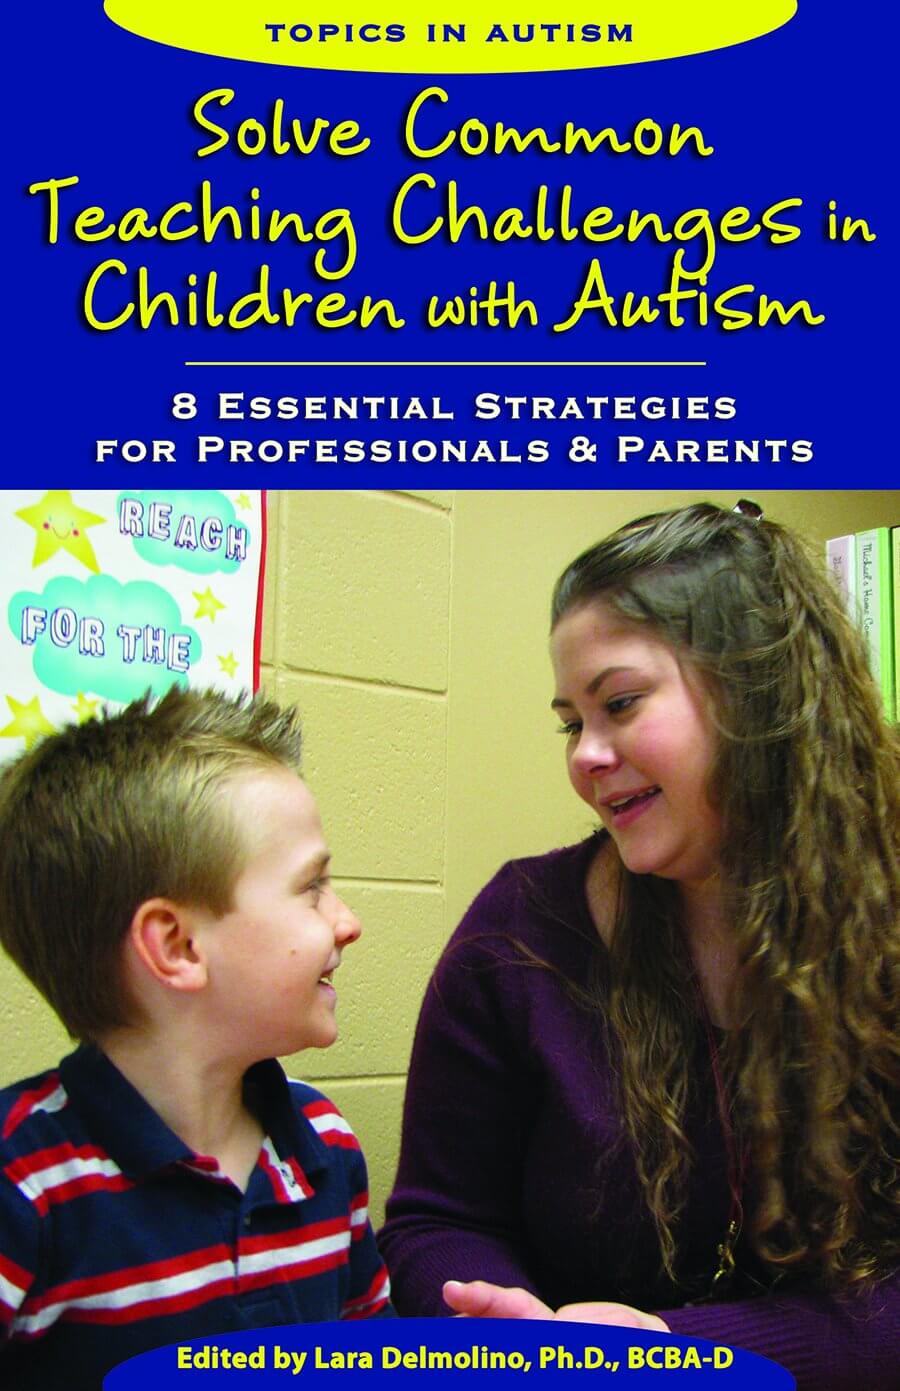 Solve Common Teaching Challenges in Children with Autism